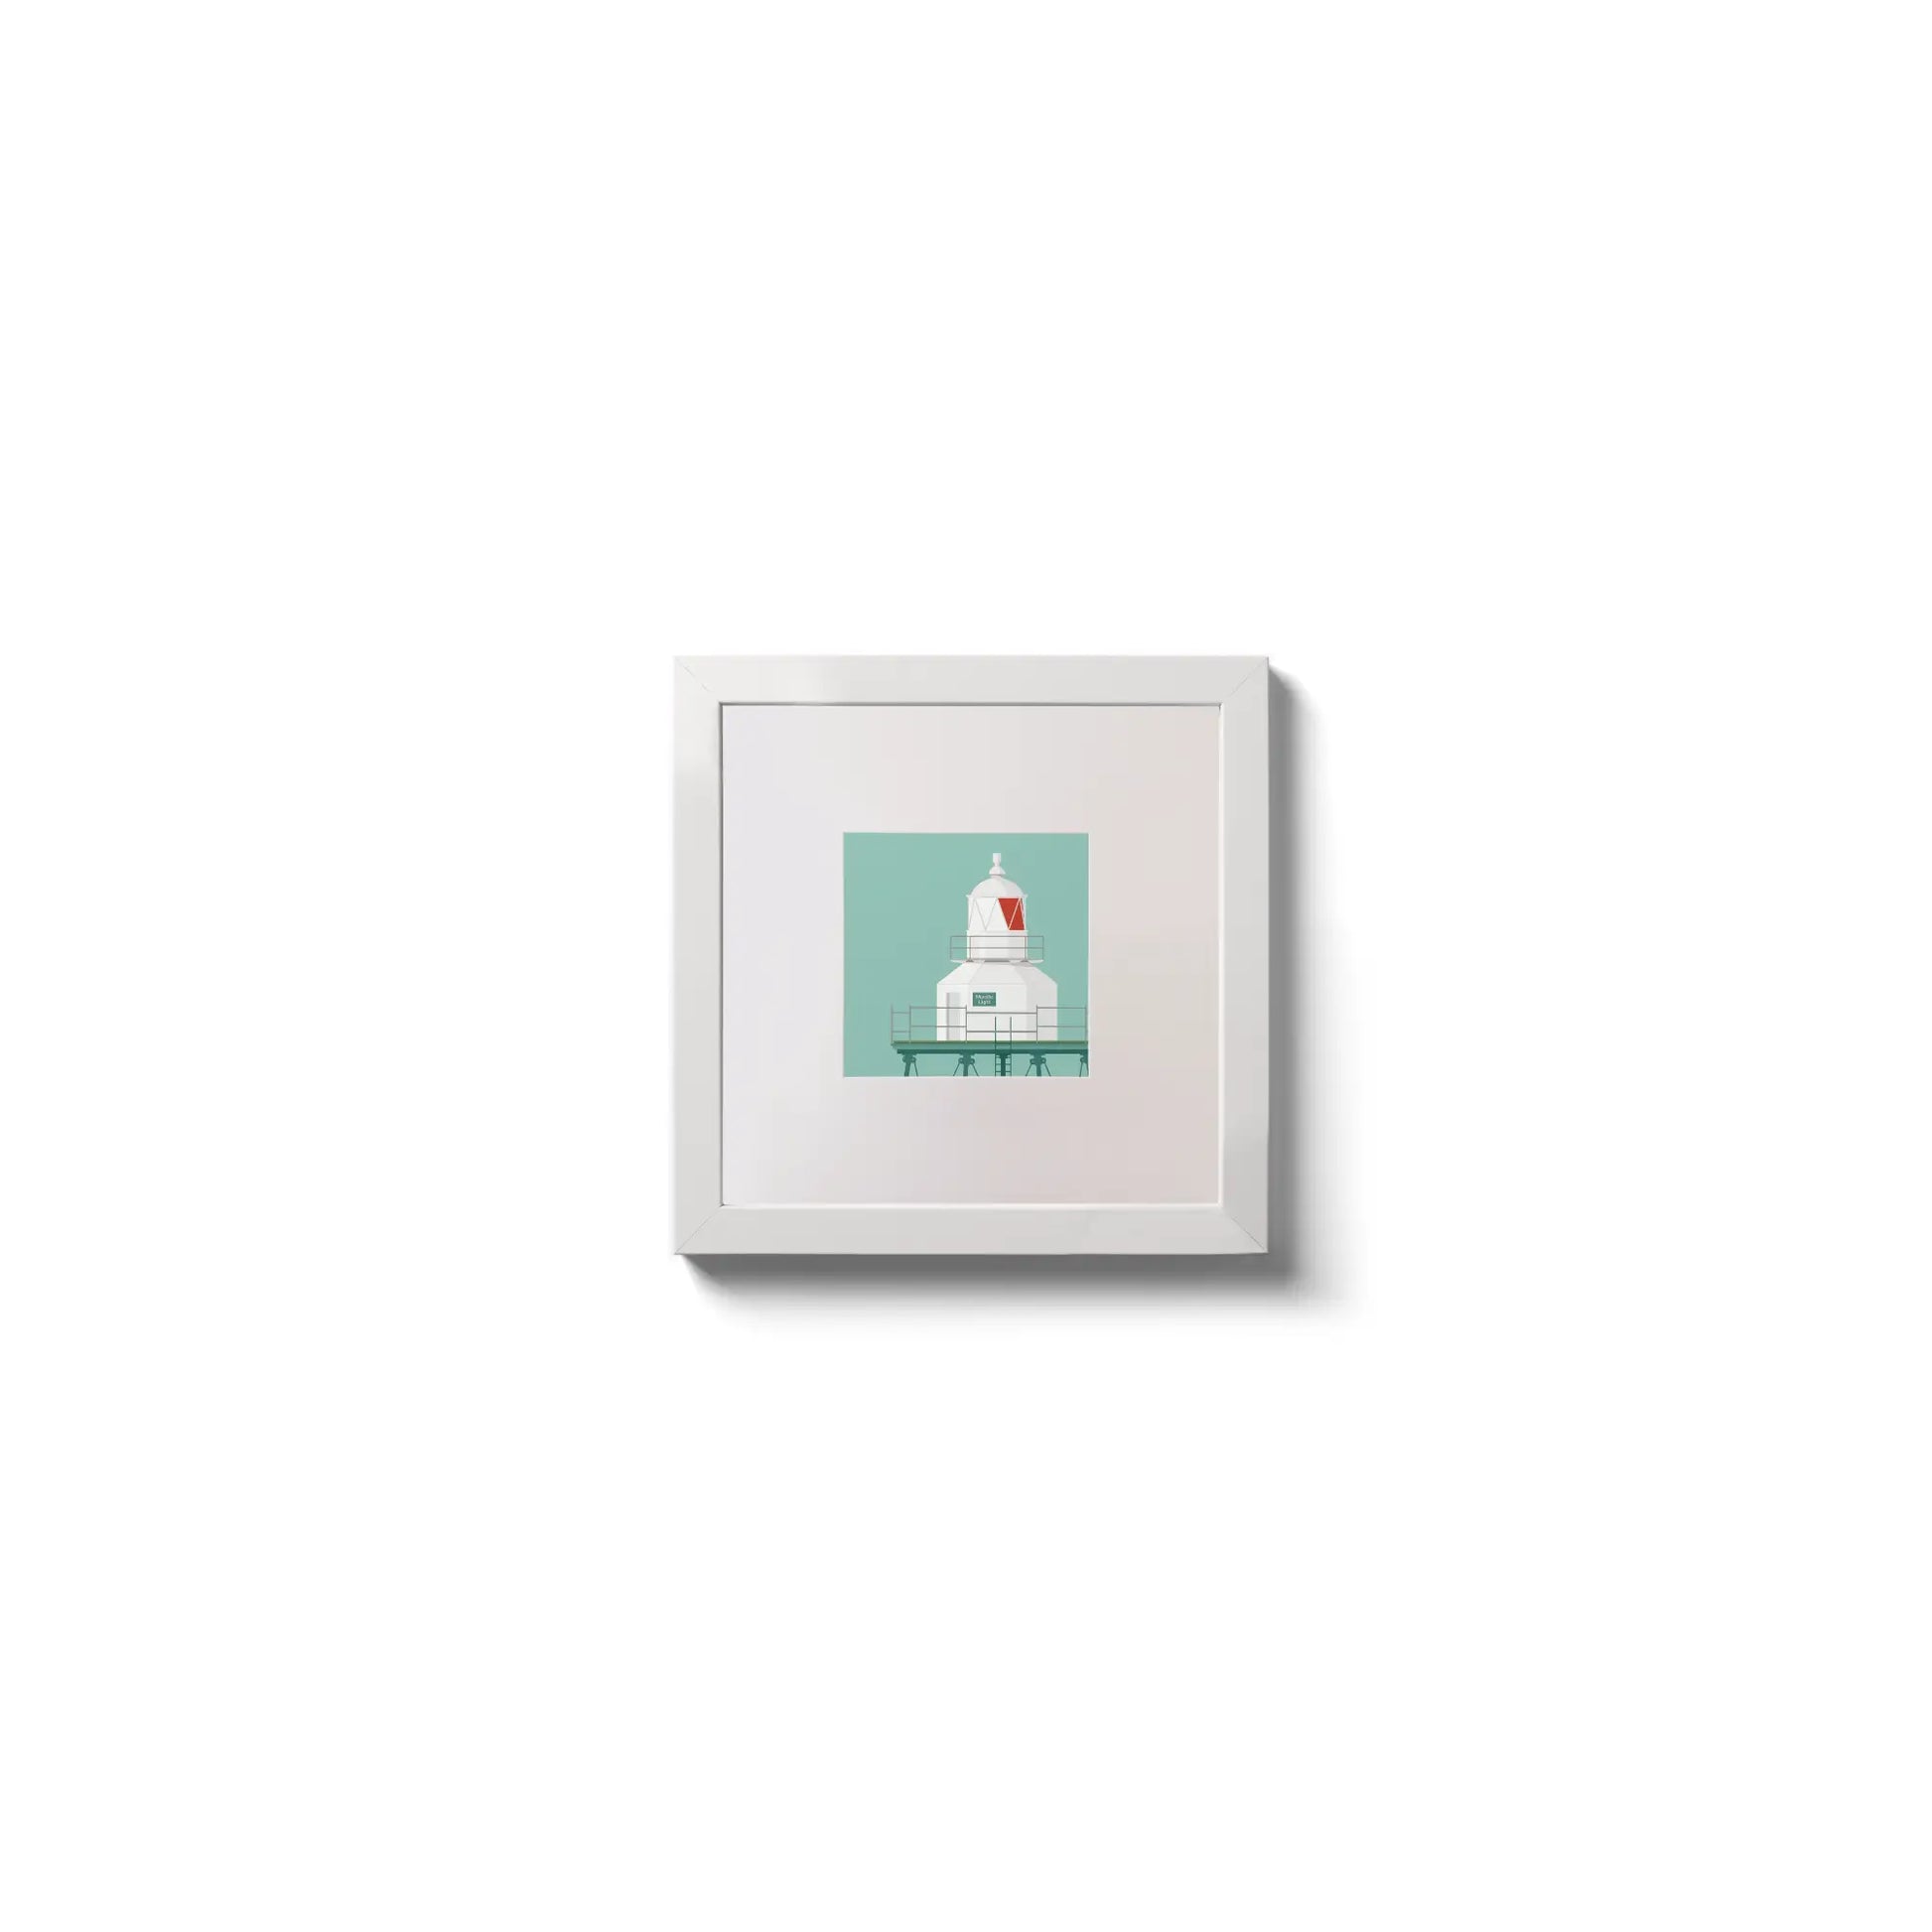 Illustration  Moville lighthouse on an ocean green background,  in a white square frame measuring 10x10cm.